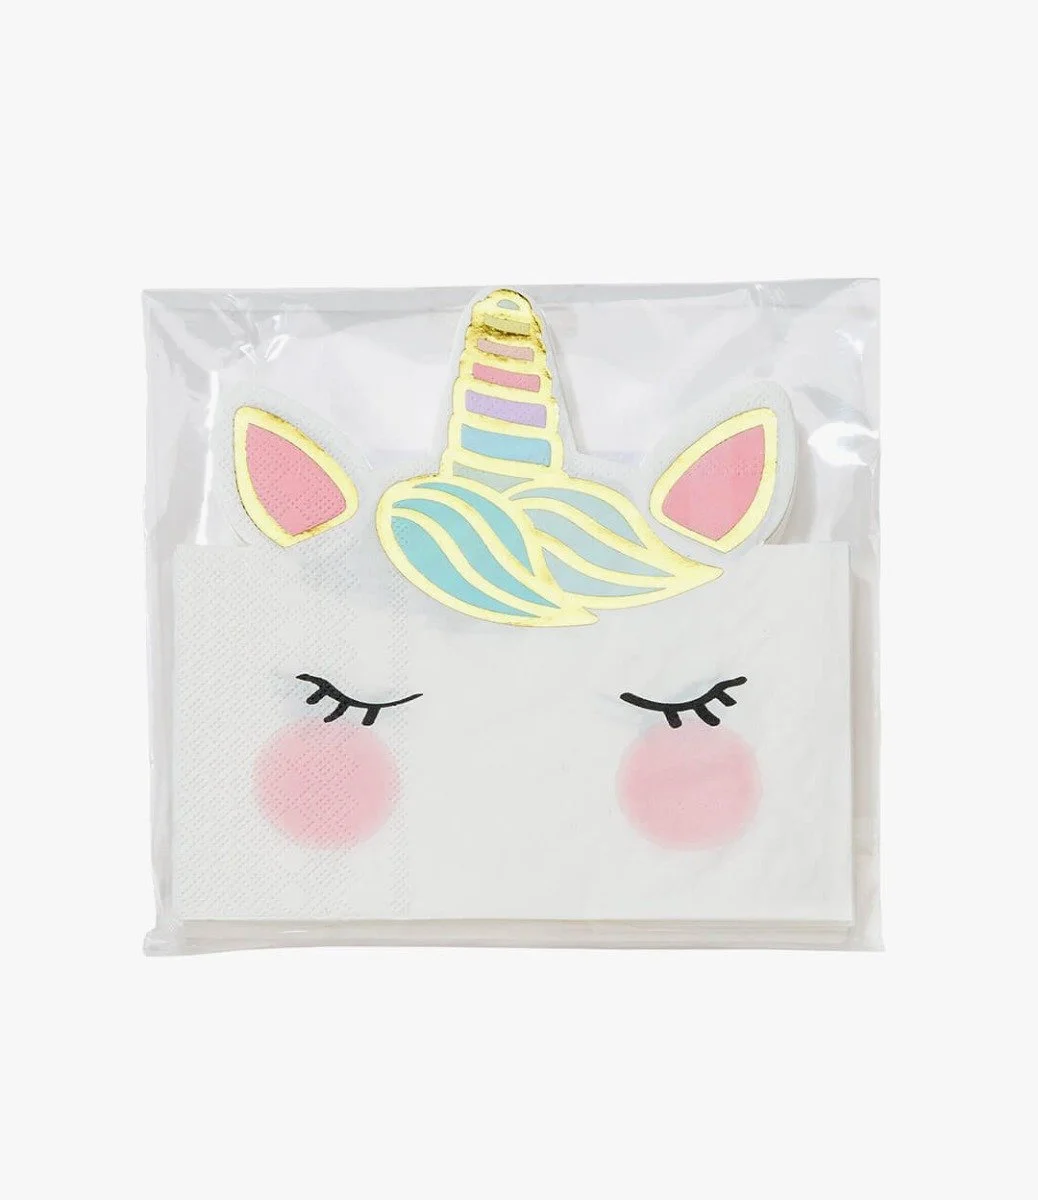 We Heart Unicorn Shaped Napkins 12pc Pack by Talking Tables